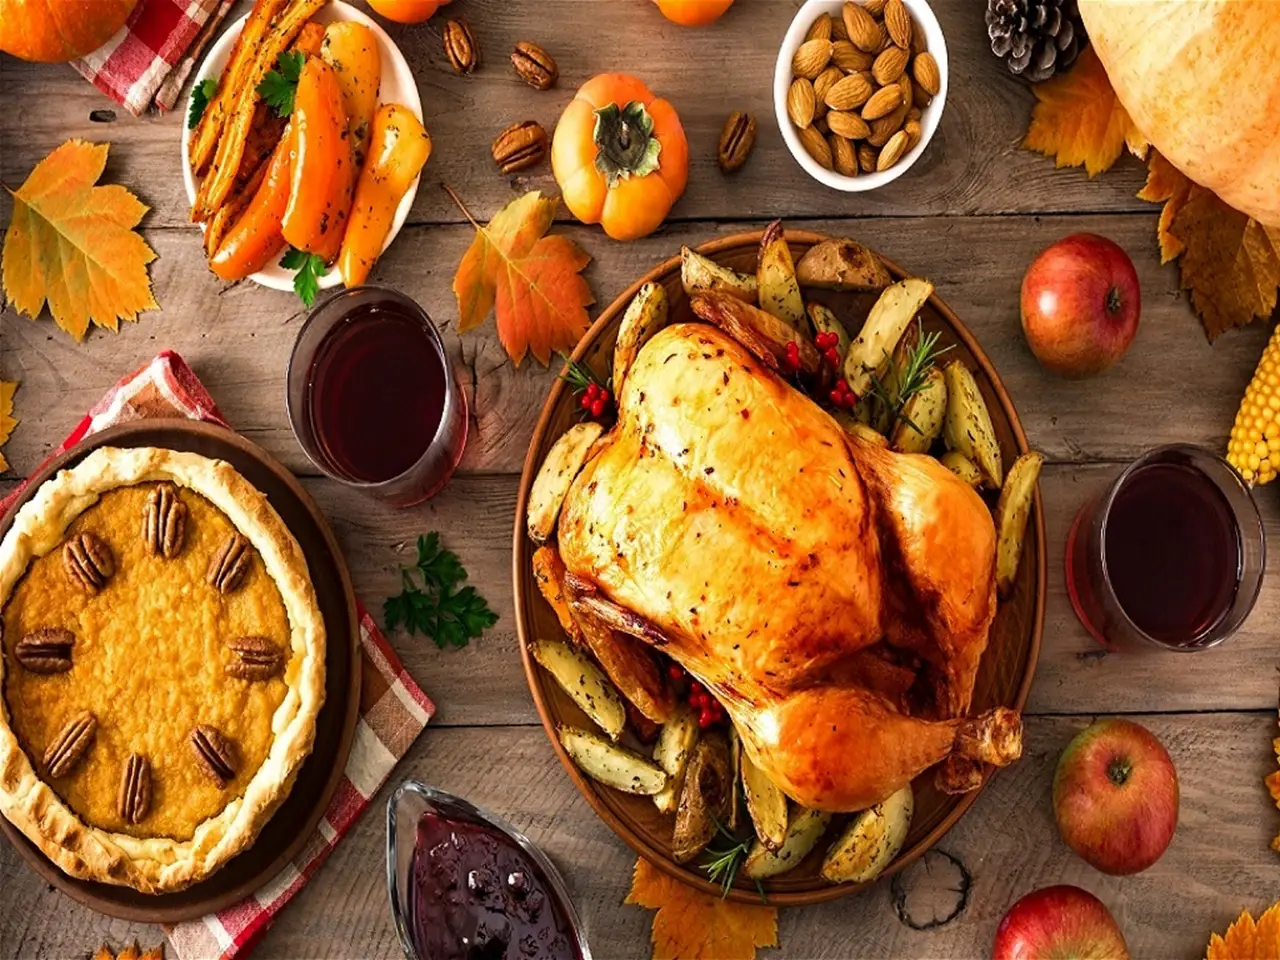 Thanksgiving evolved into a holiday where people would gather with friends and family to enjoy a delicious meal.